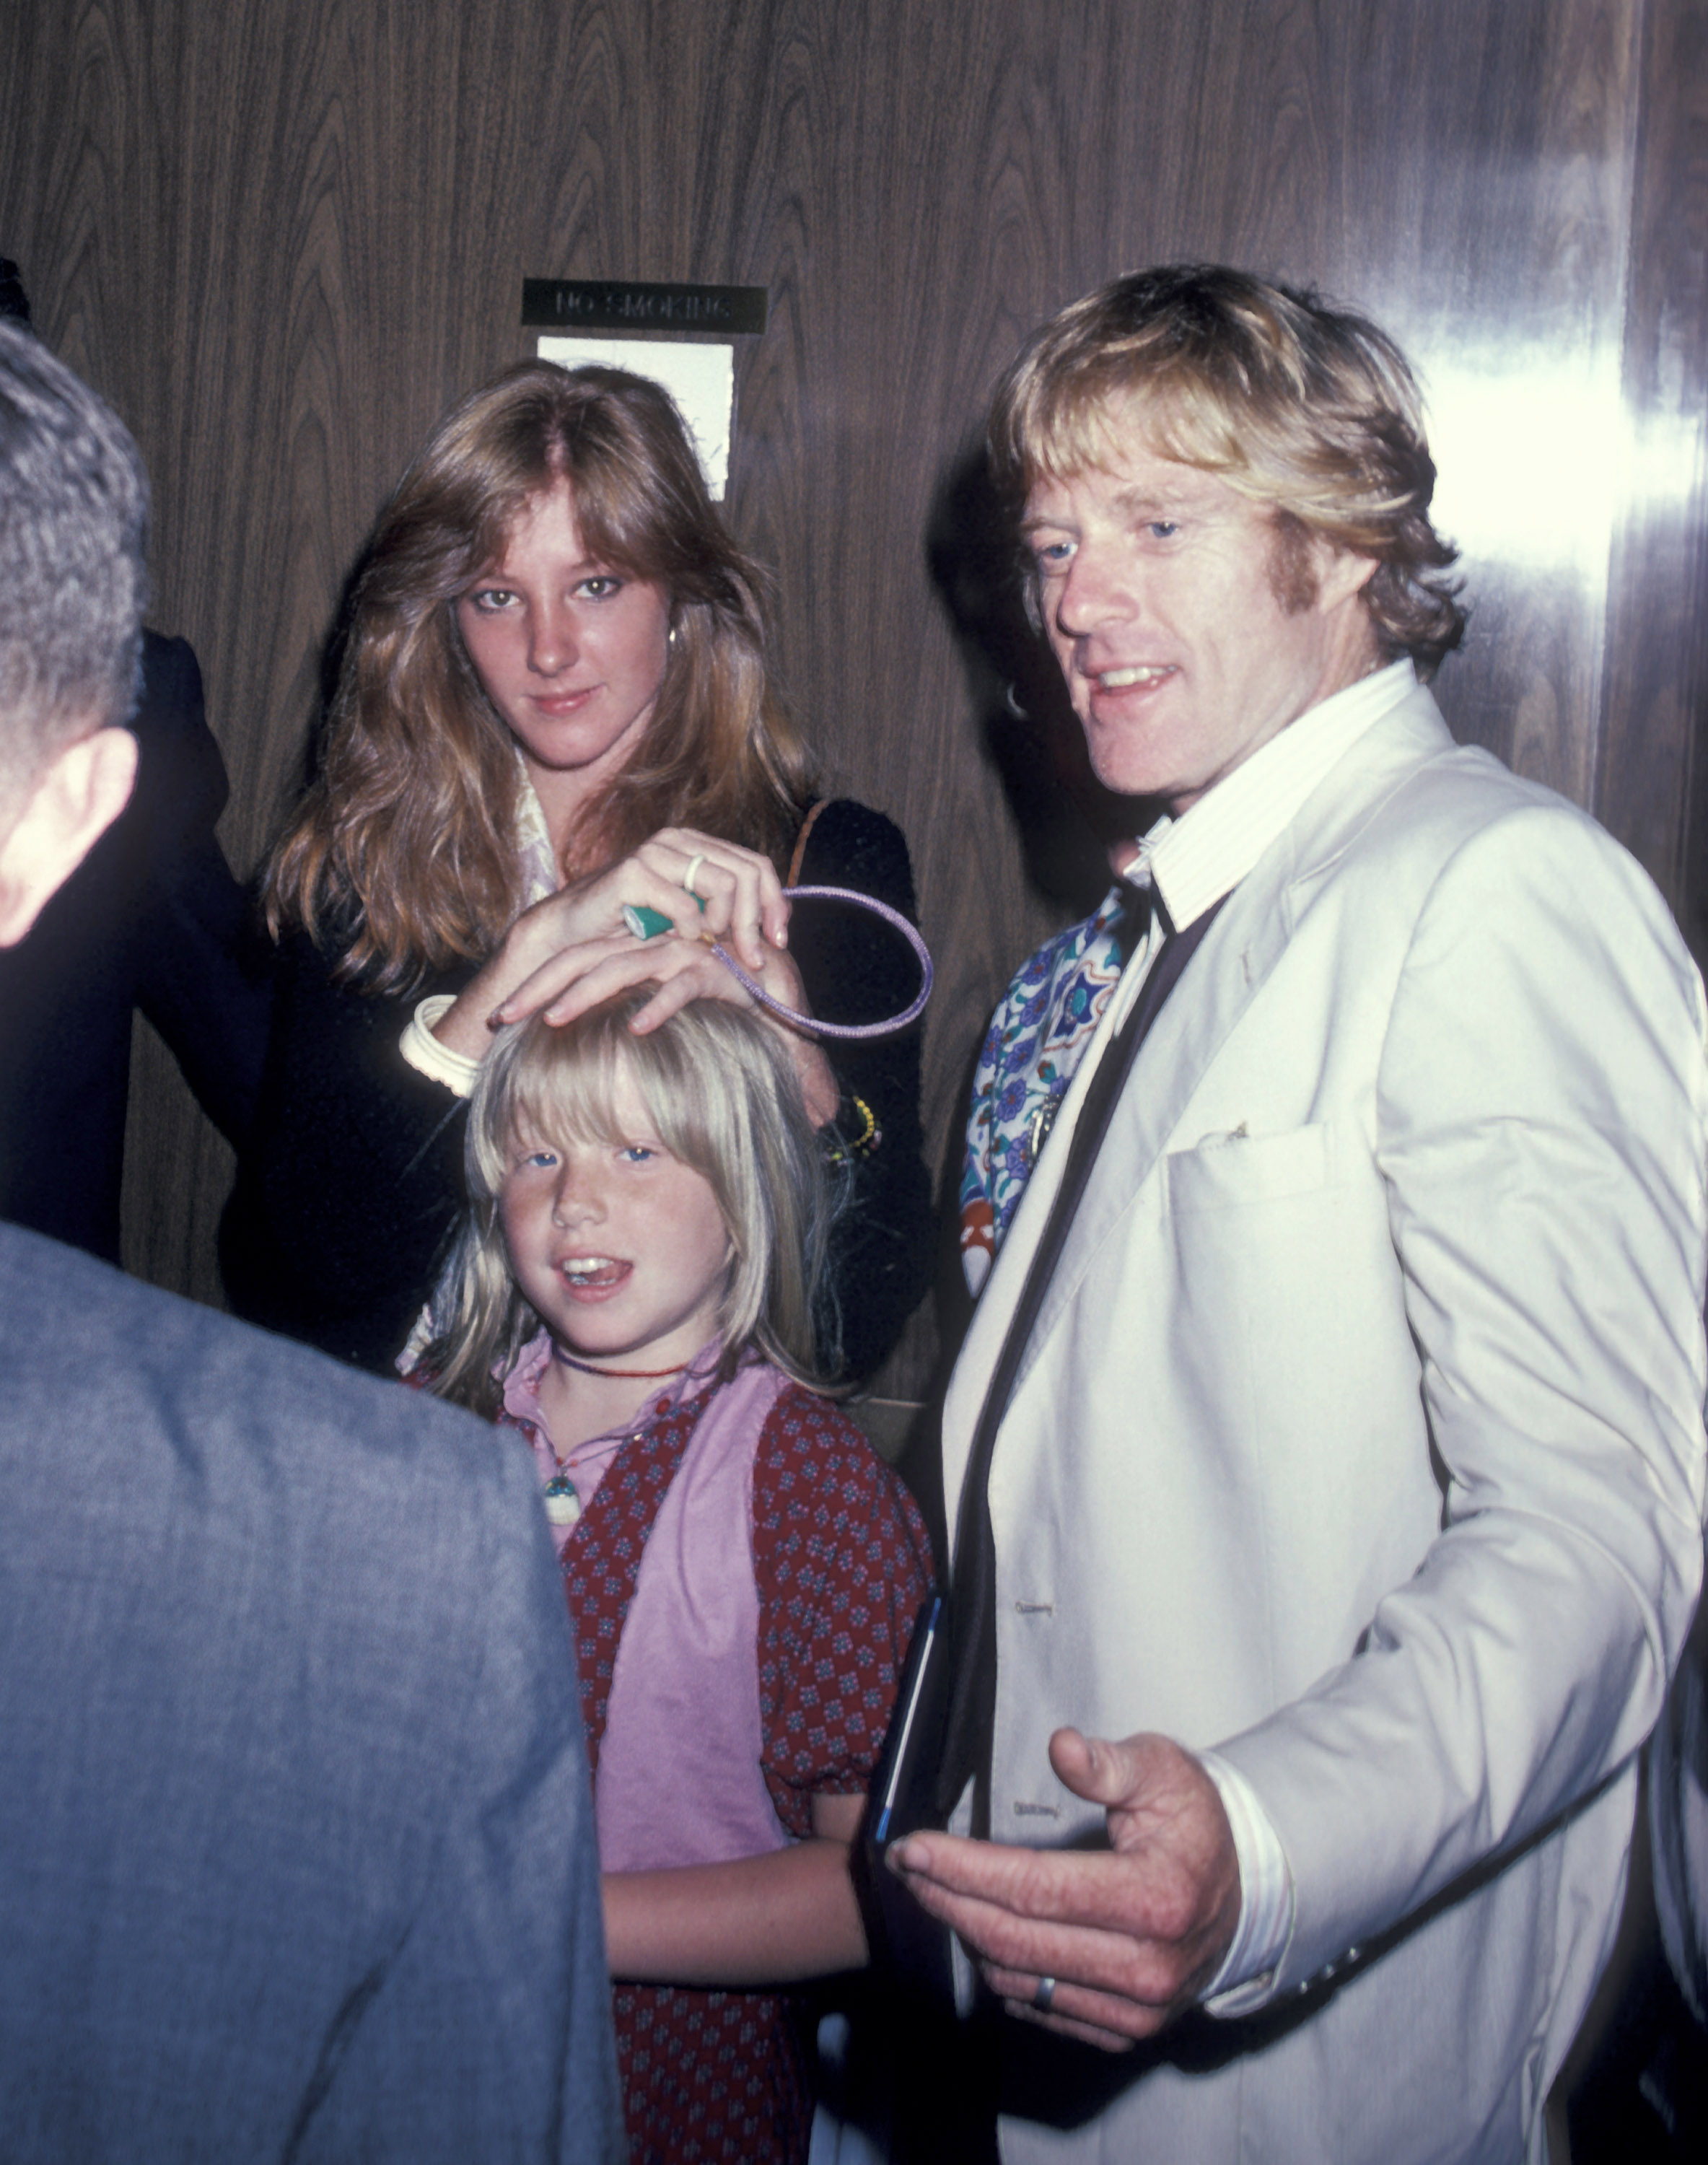 Shauna Redford, Amy Redford, and Robert Redford on June 6, 1980, in New York City | Source: Getty Images